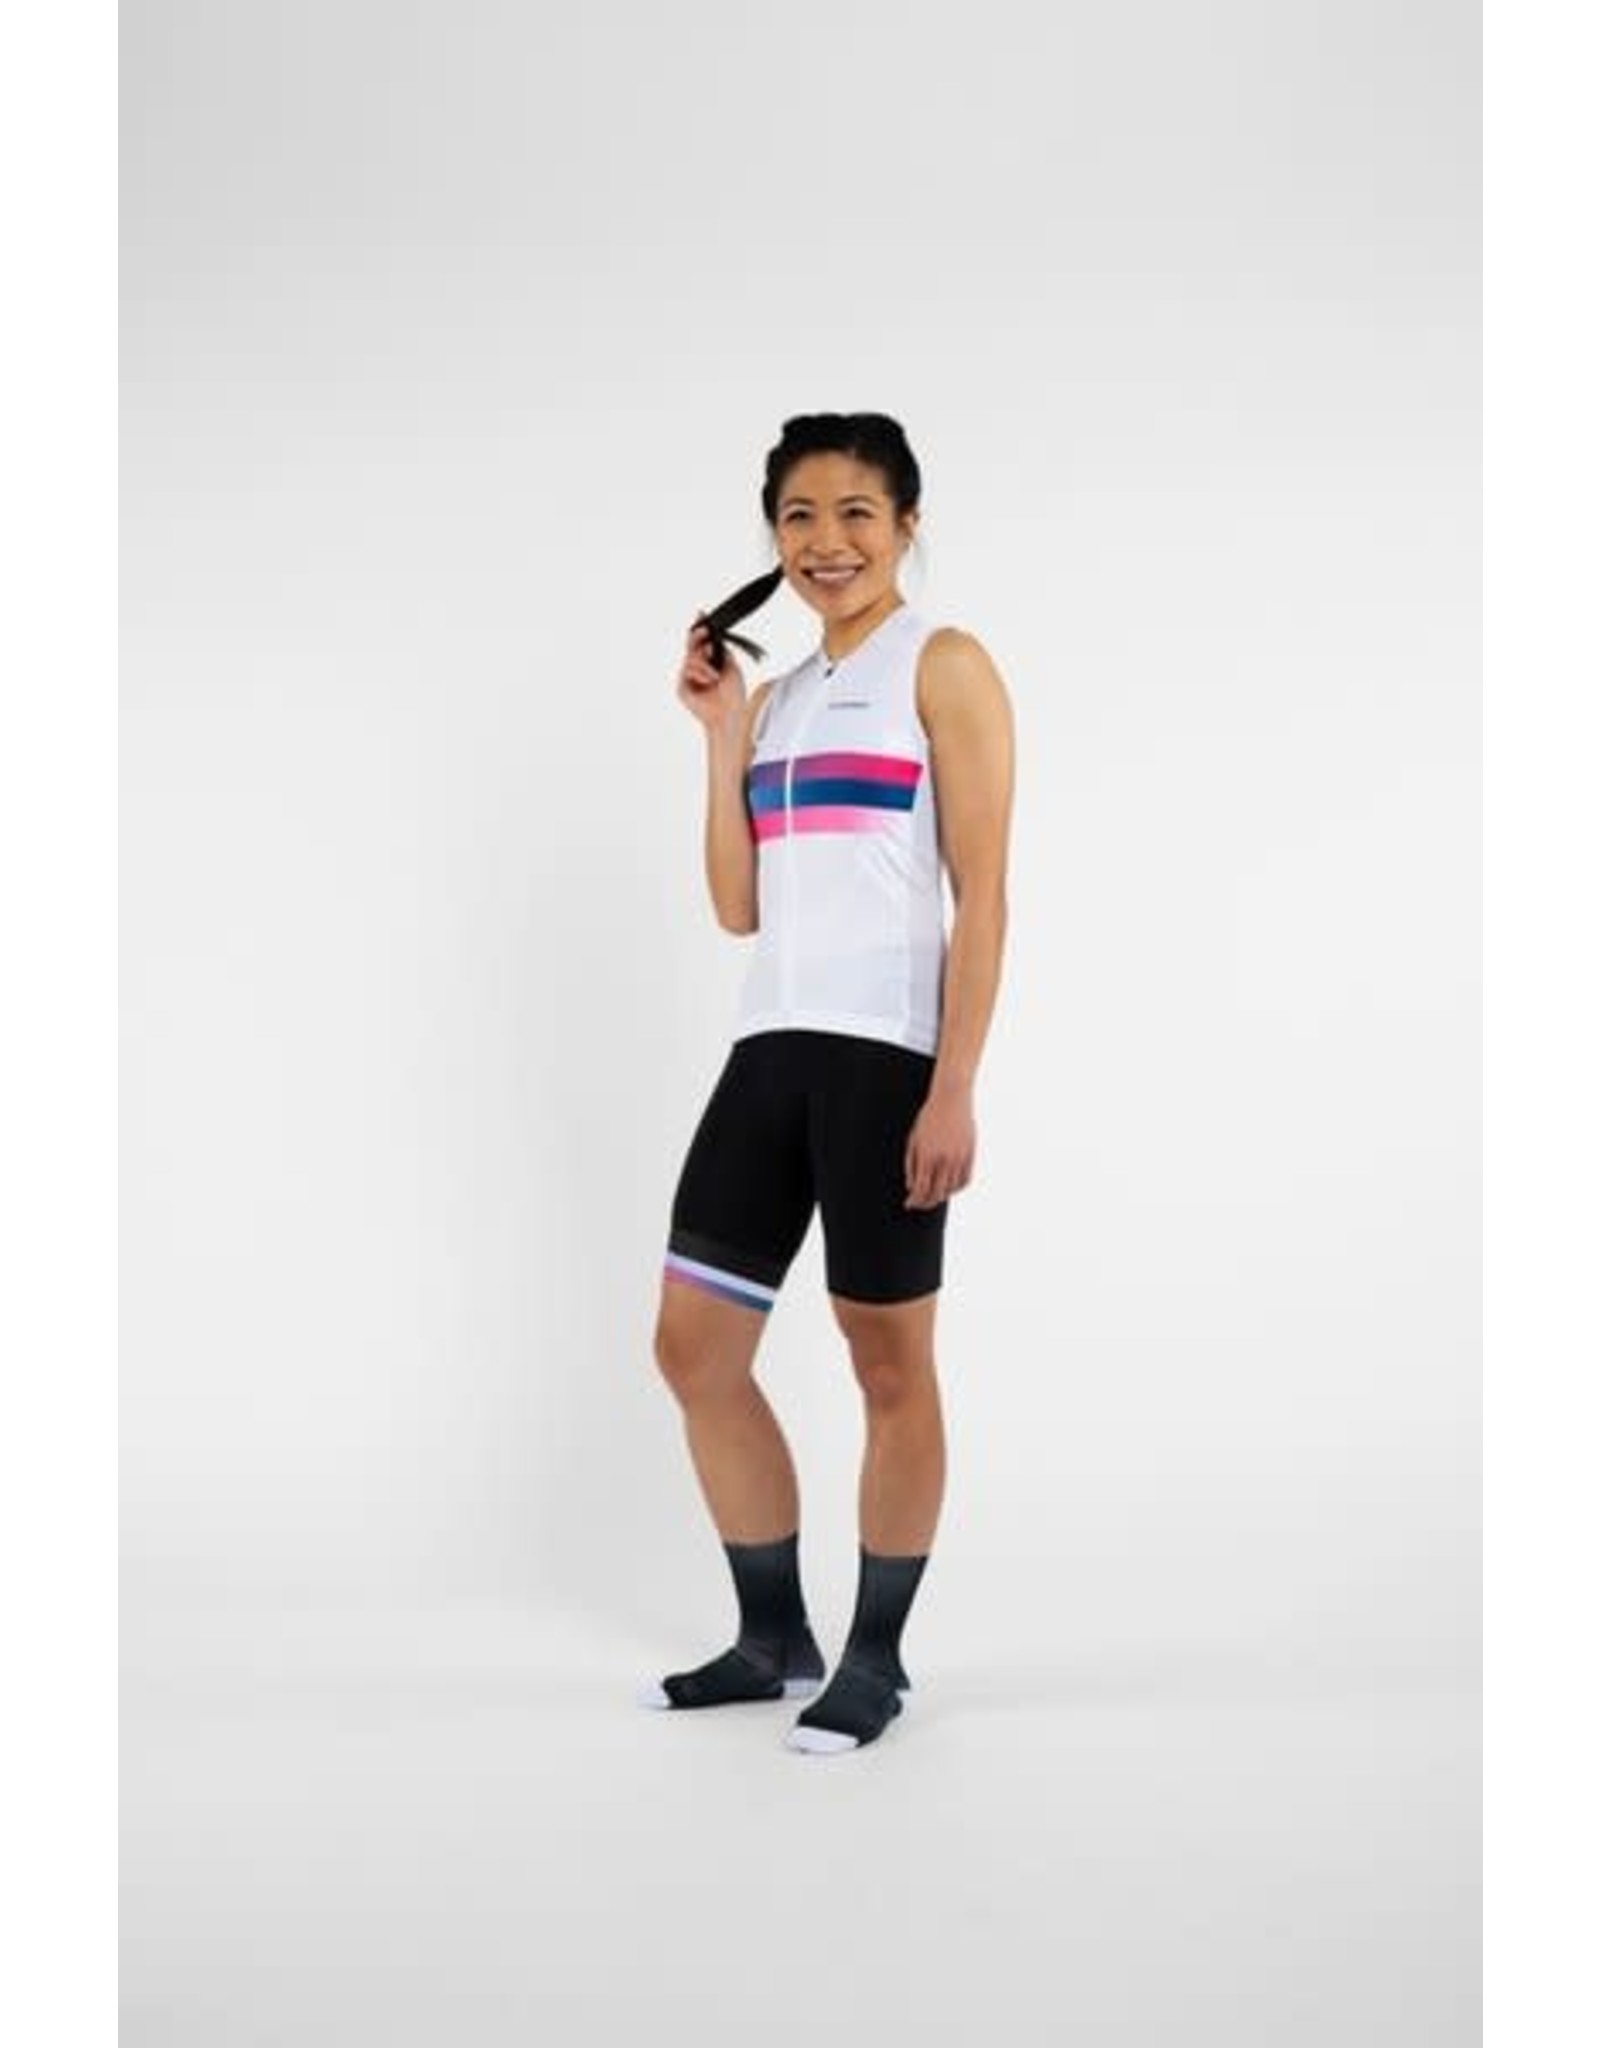 Peppermint '21, PEPPERMINT, Signature Sleeveless Jersey, Assorted Colours